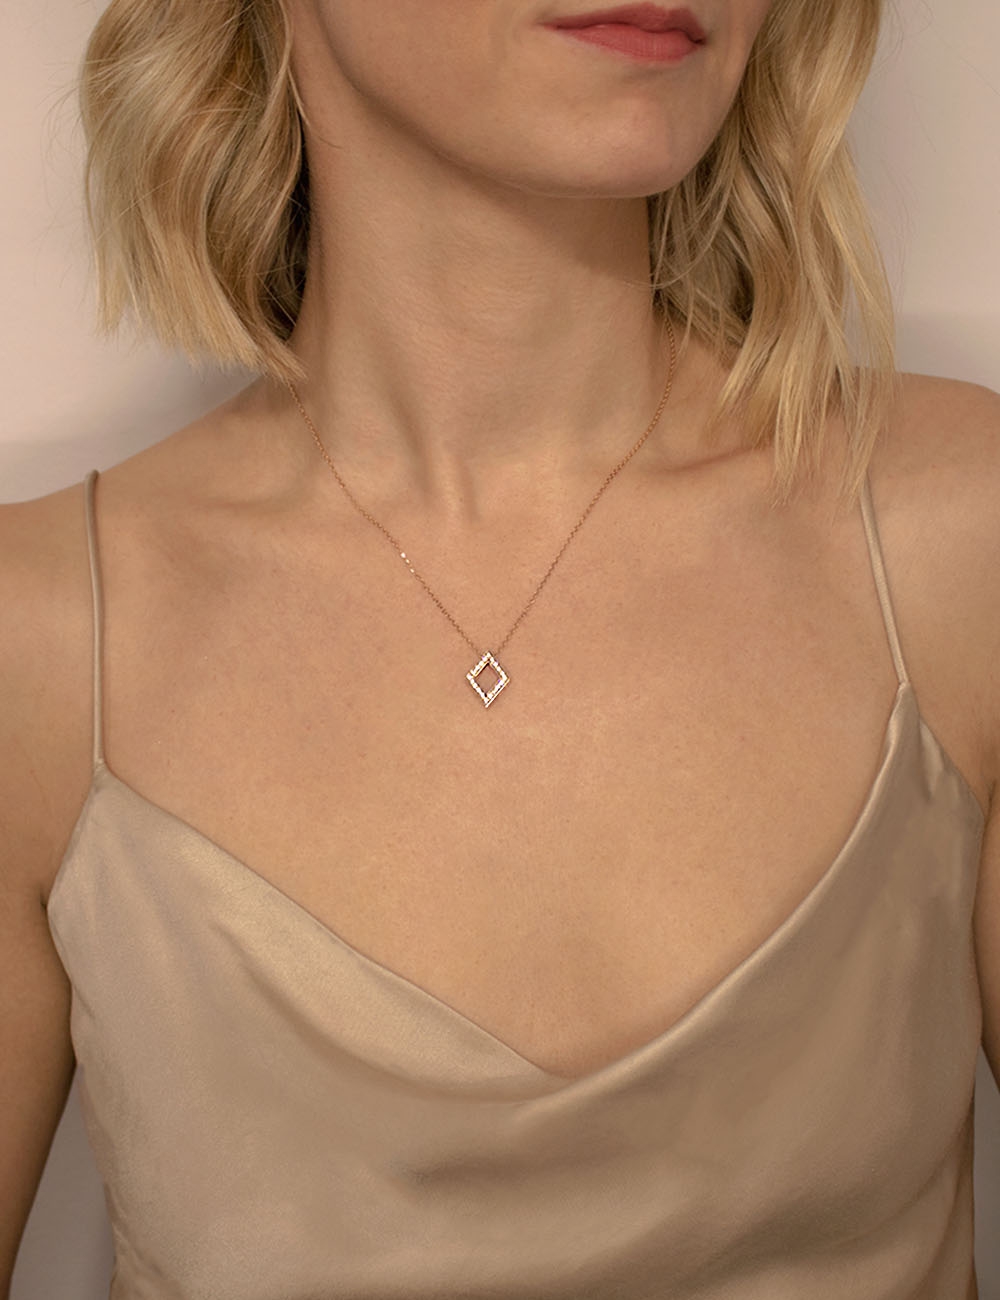 Refined and modern, the DayLight Losange pendant by D.Bachet in rose gold and white diamonds adds elegance.